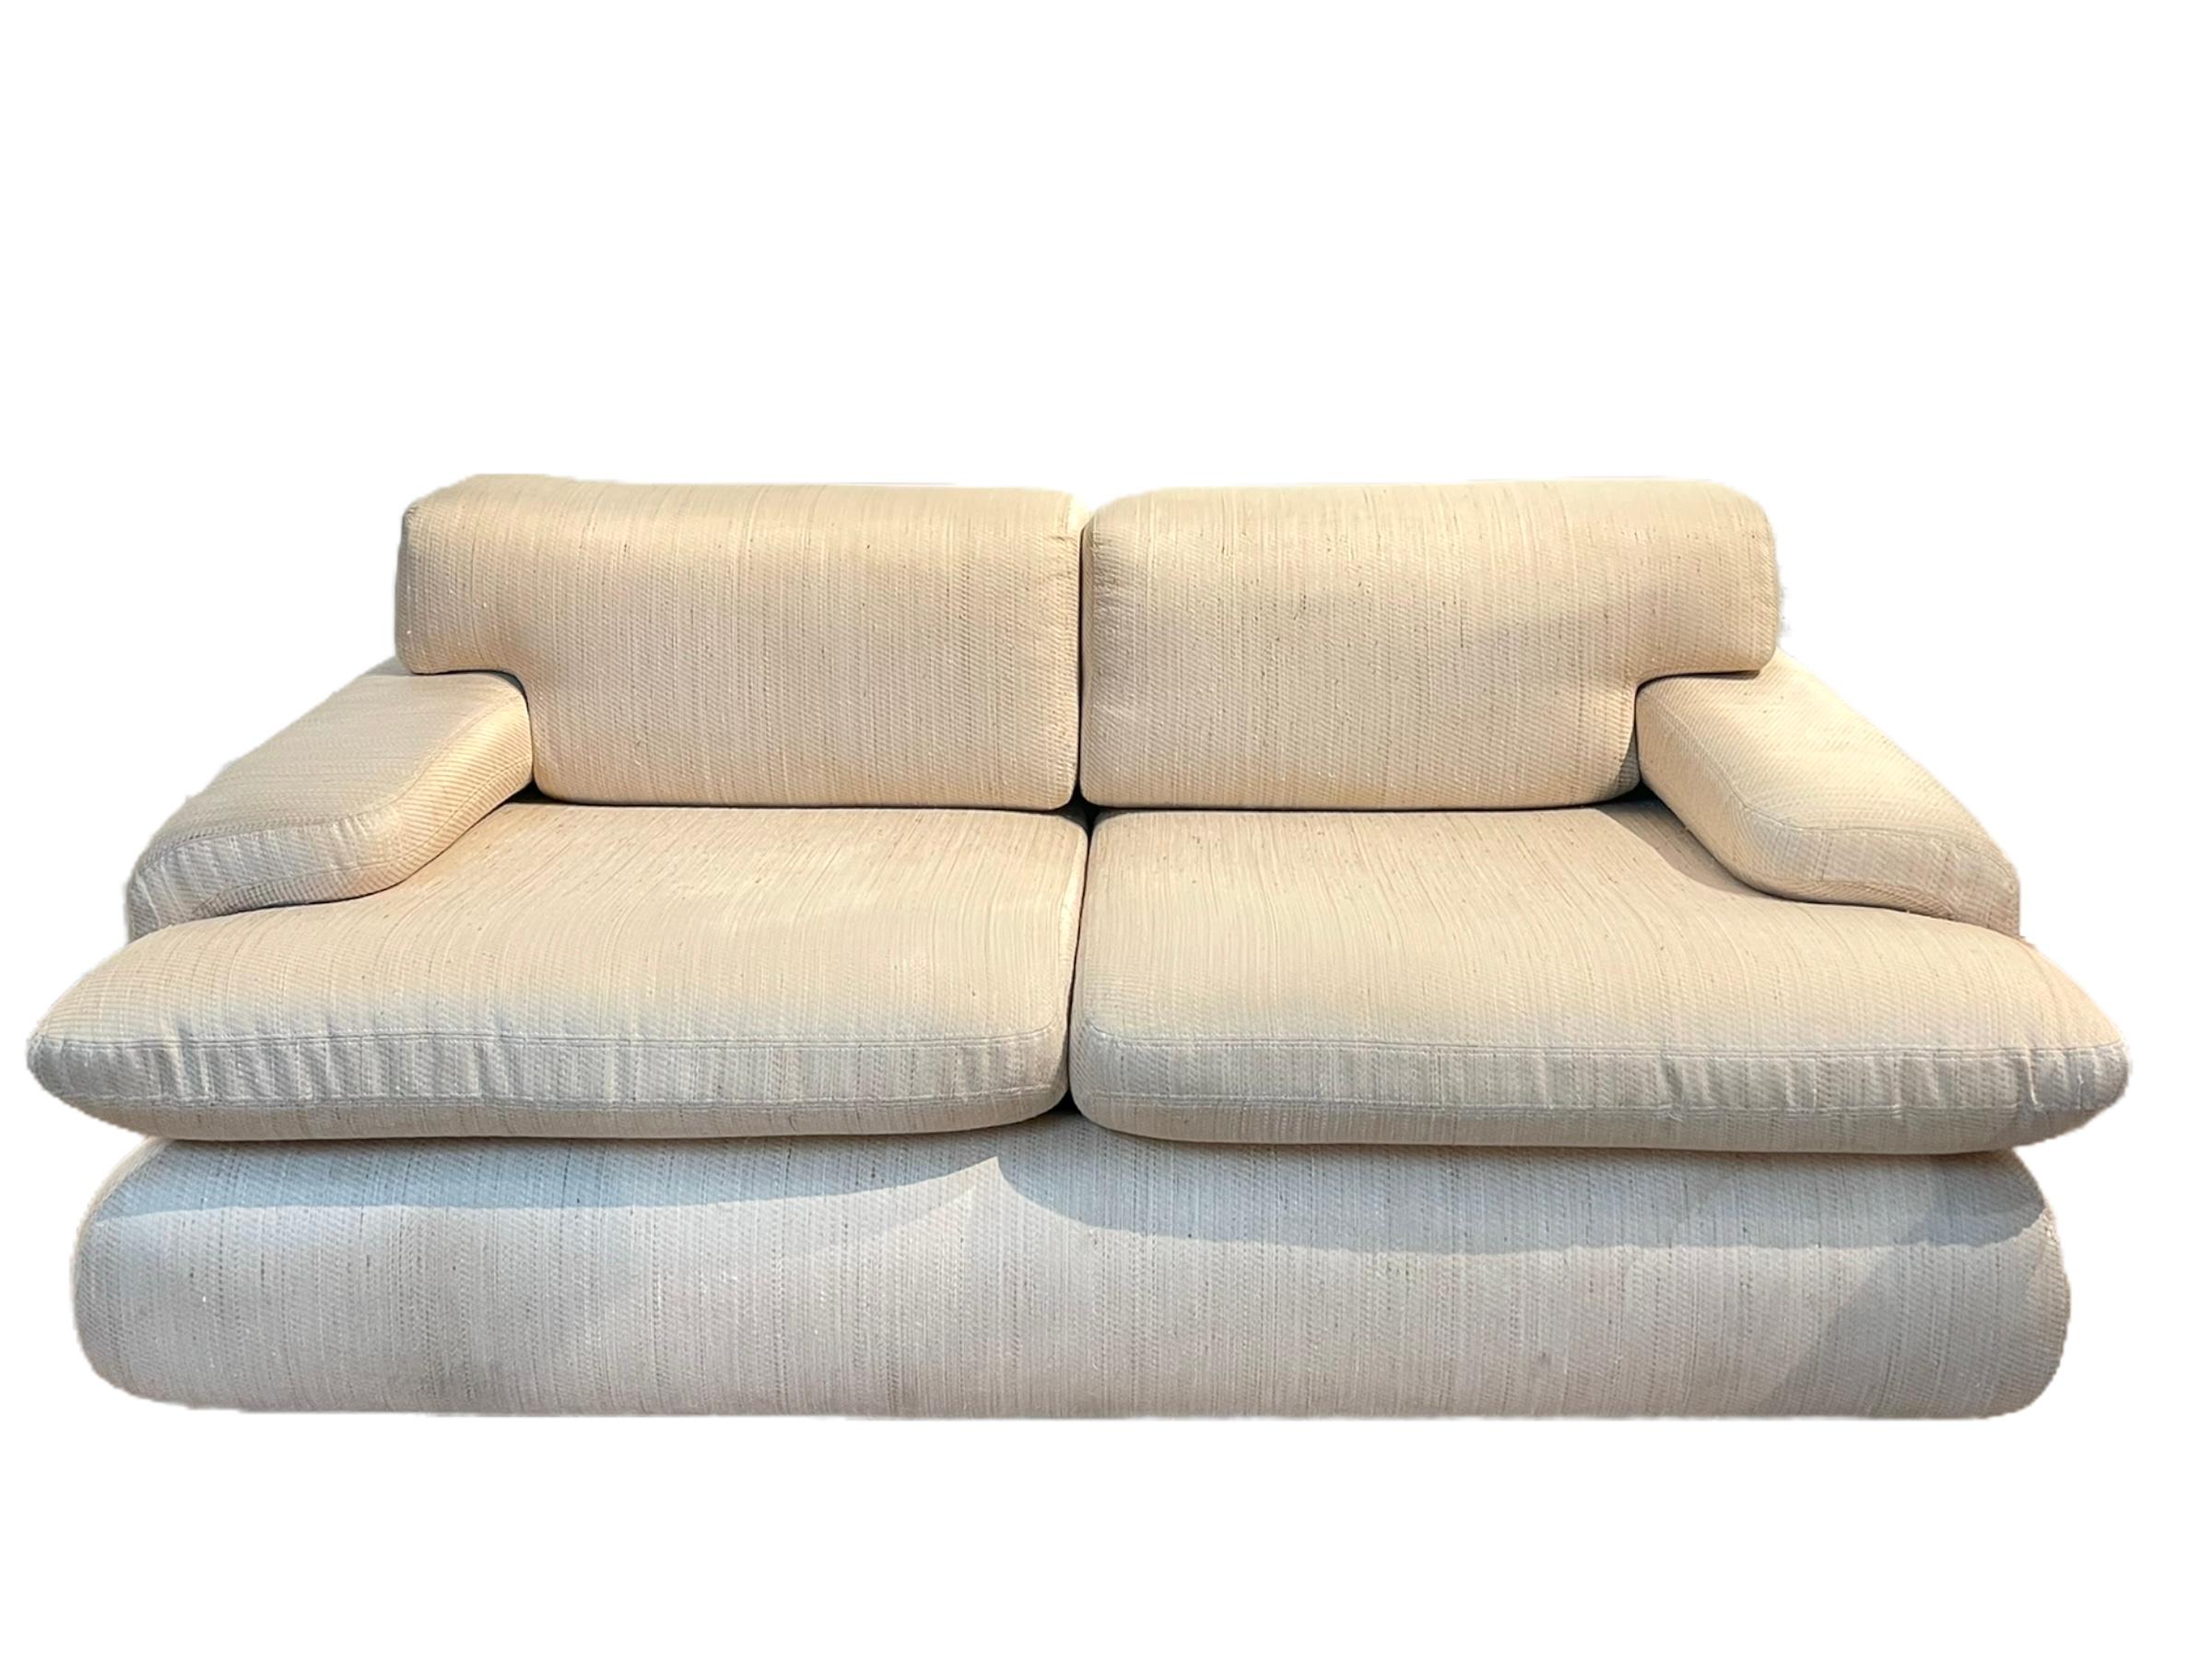 Late 20th Century Preview Settee by Vladimir Kagan For Sale